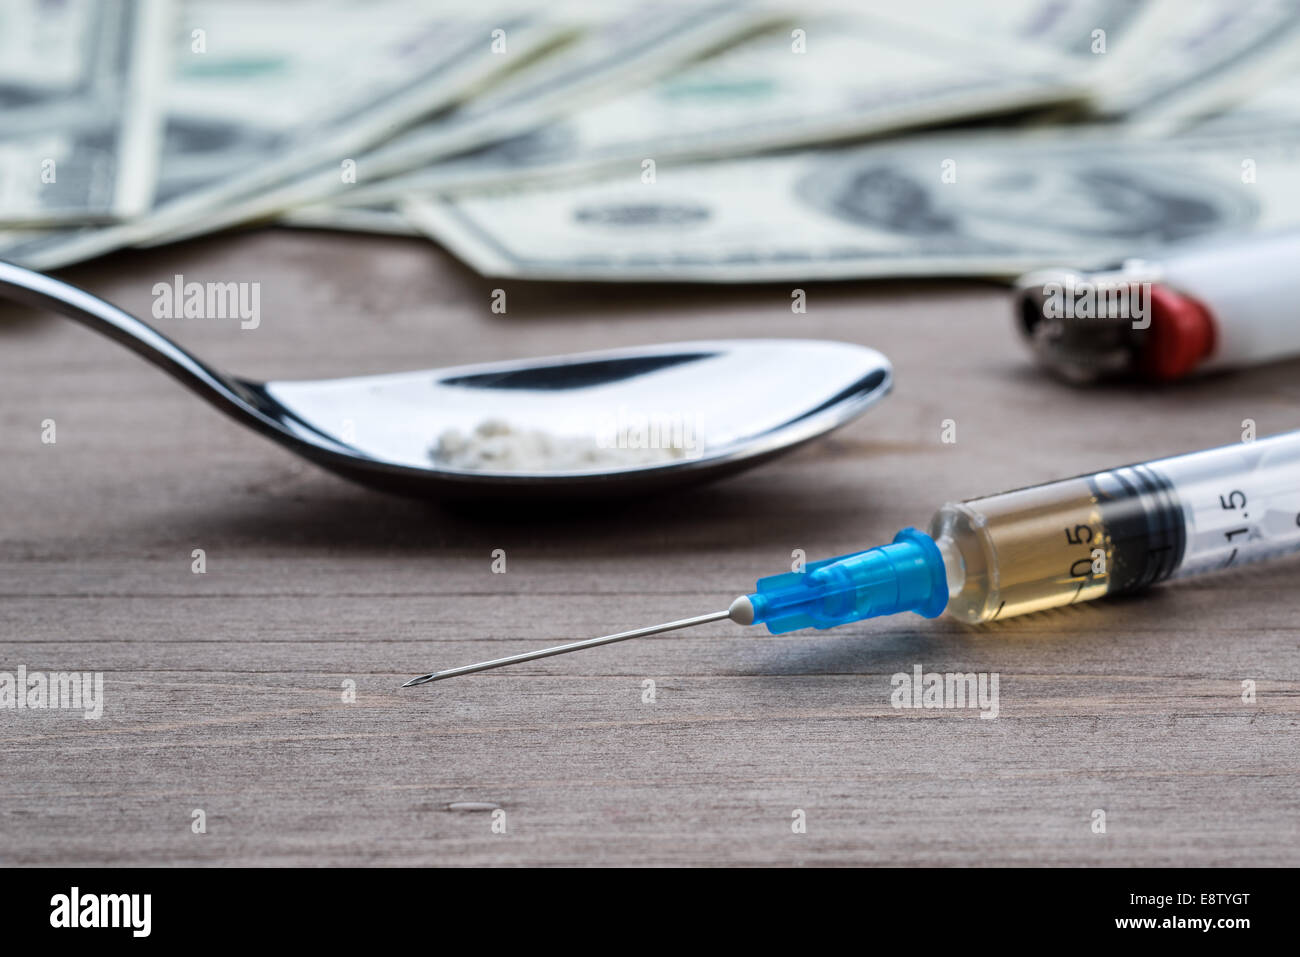 Drug syringe, cooked heroin on spoon and money Stock Photo